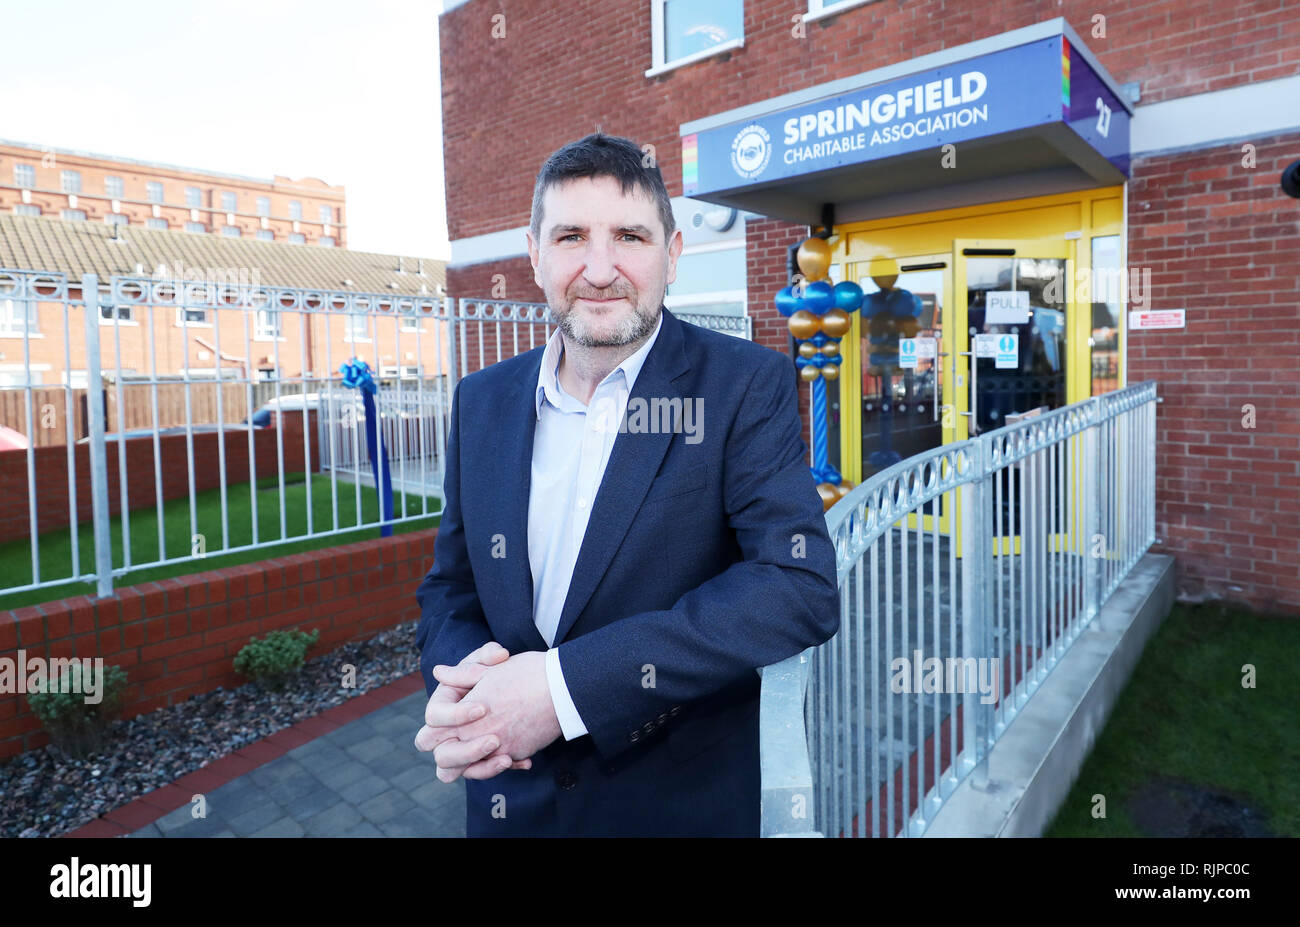 Springfield Charitable Association general manager Terry McNeill at the opening of the Association's Youth club for older people in a once derelict building on Cupar Street, Belfast. Stock Photo